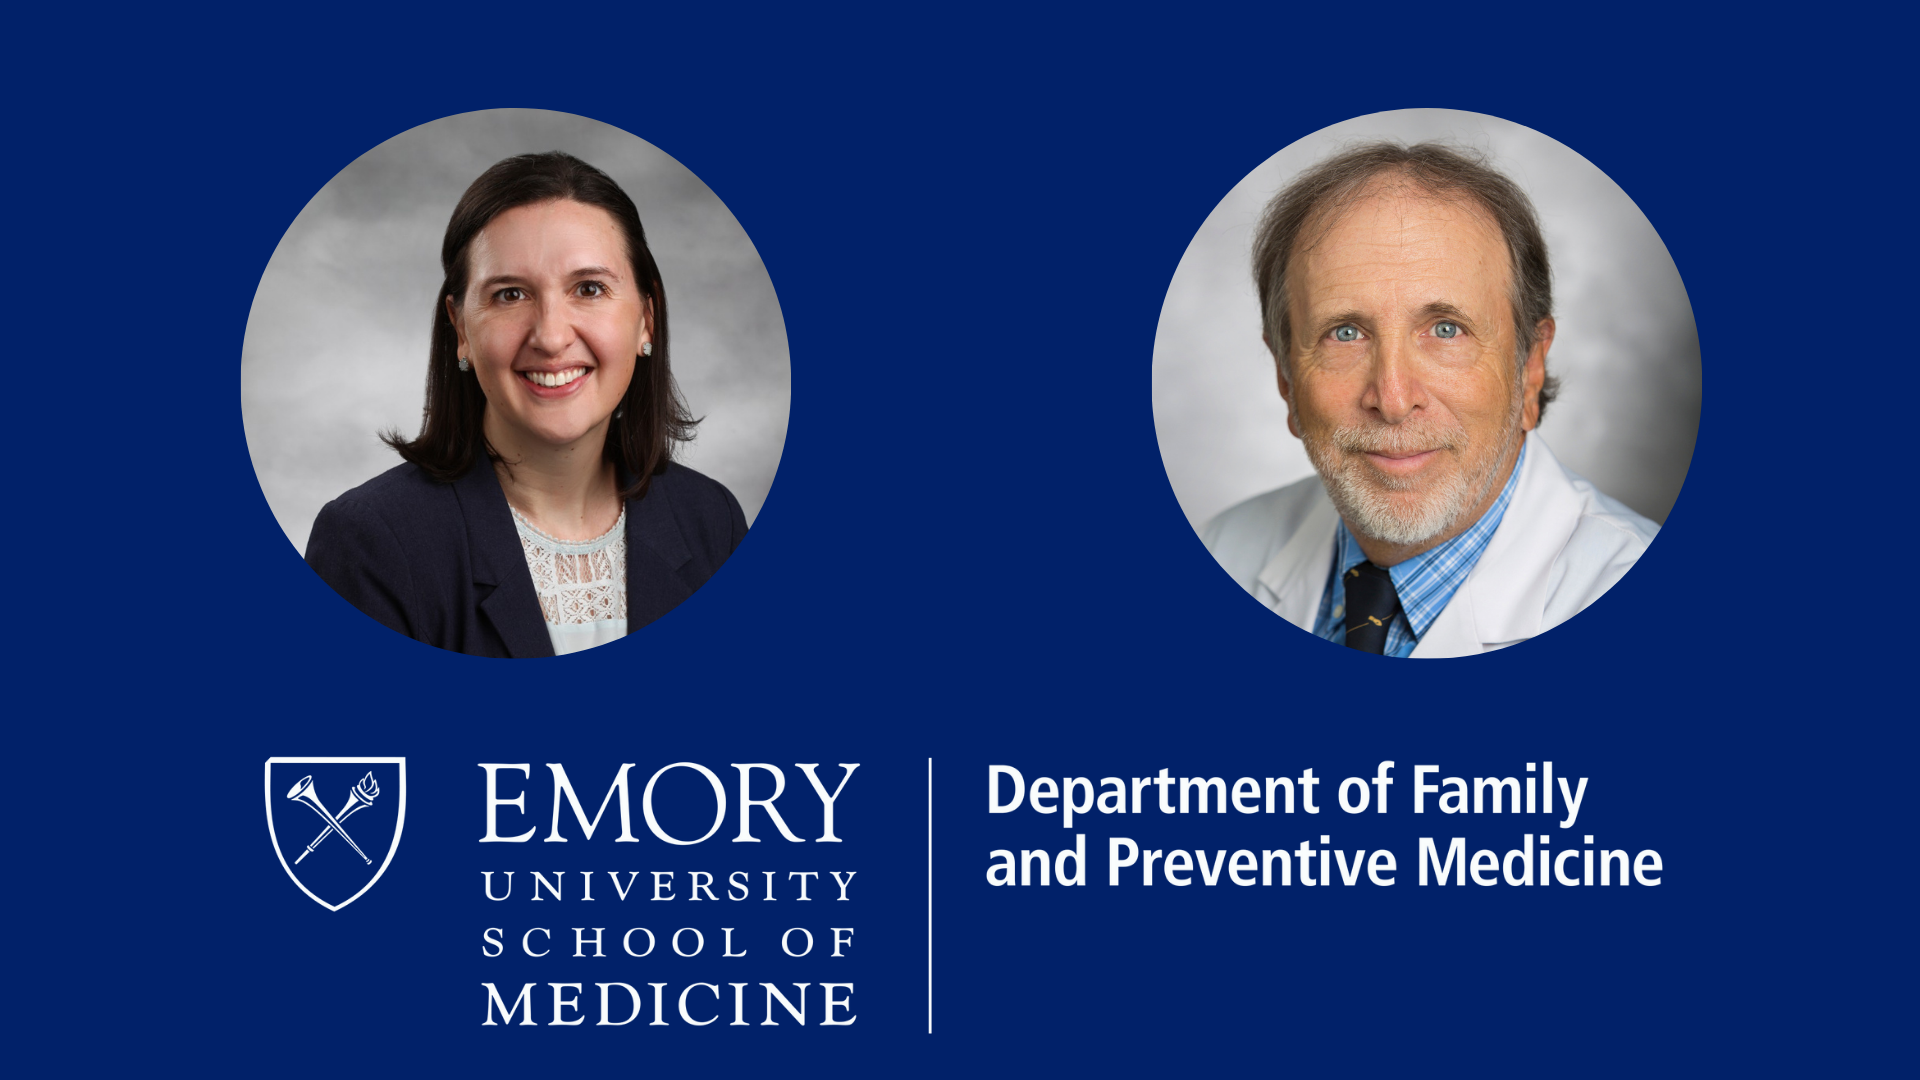 Dr. Sara Turbow and Dr. Richard Goodman with Emory University School of Medicine Department of Family and Preventive Medicine logo